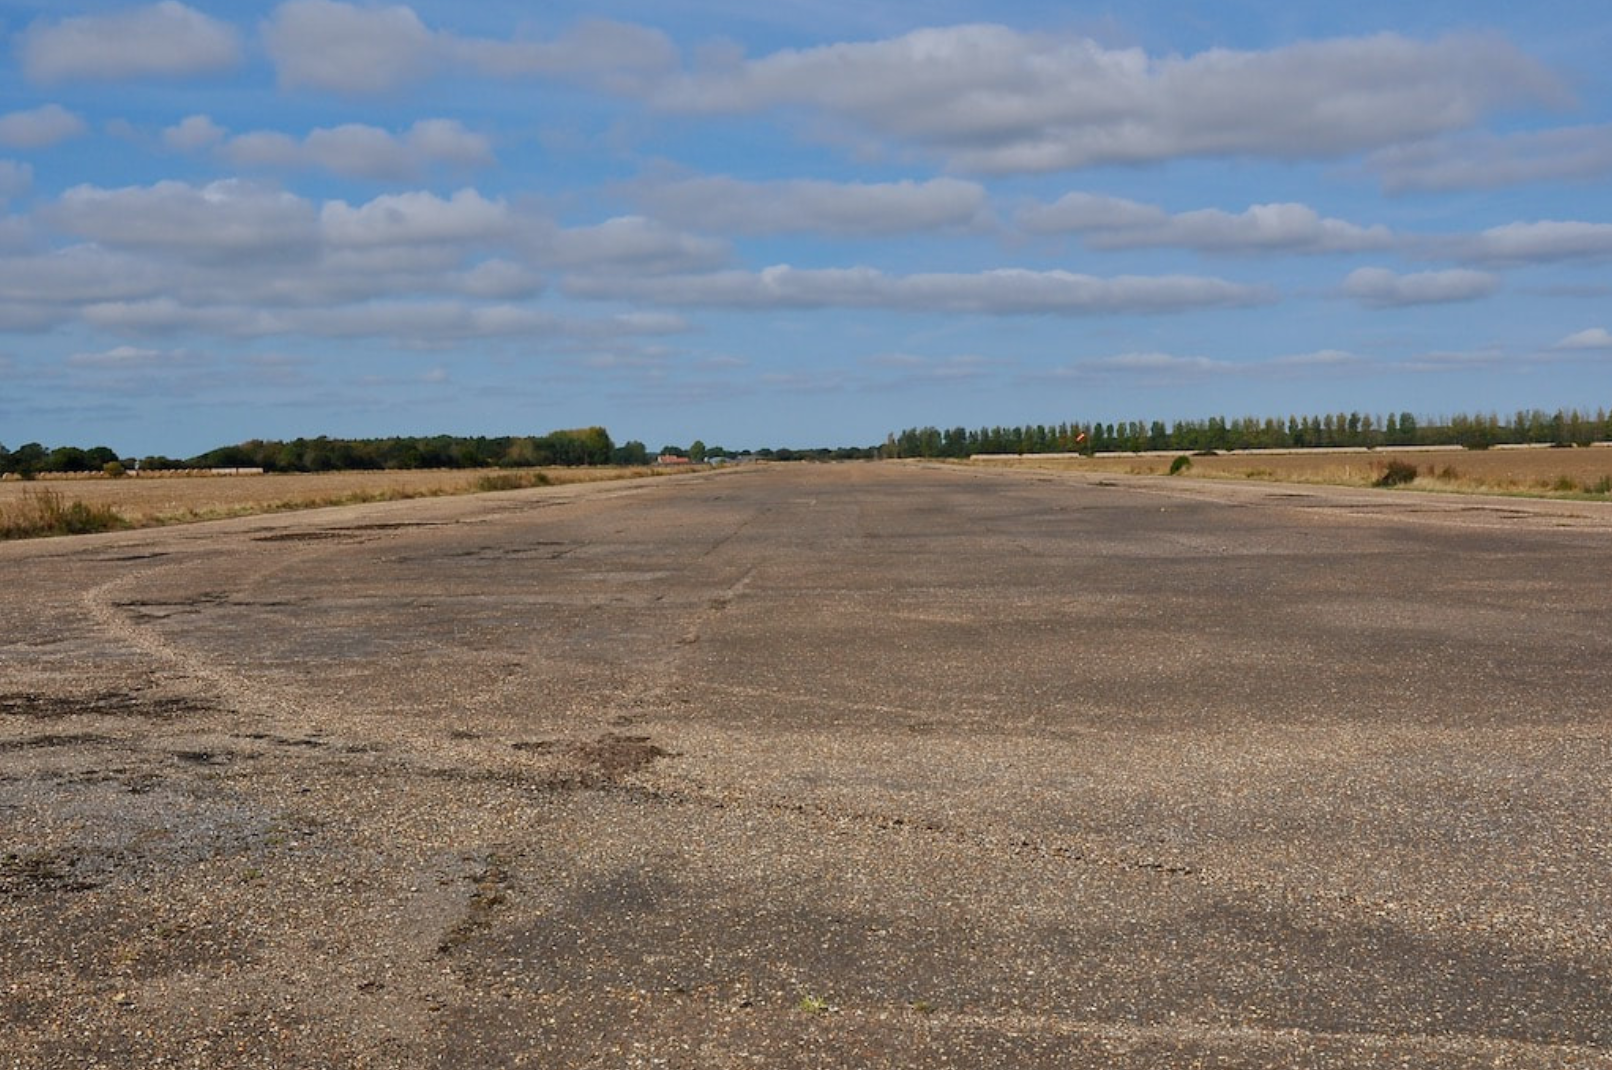 007Runway 14:32. Looking north west from the runway 32 threshold - 20 September 2009.png